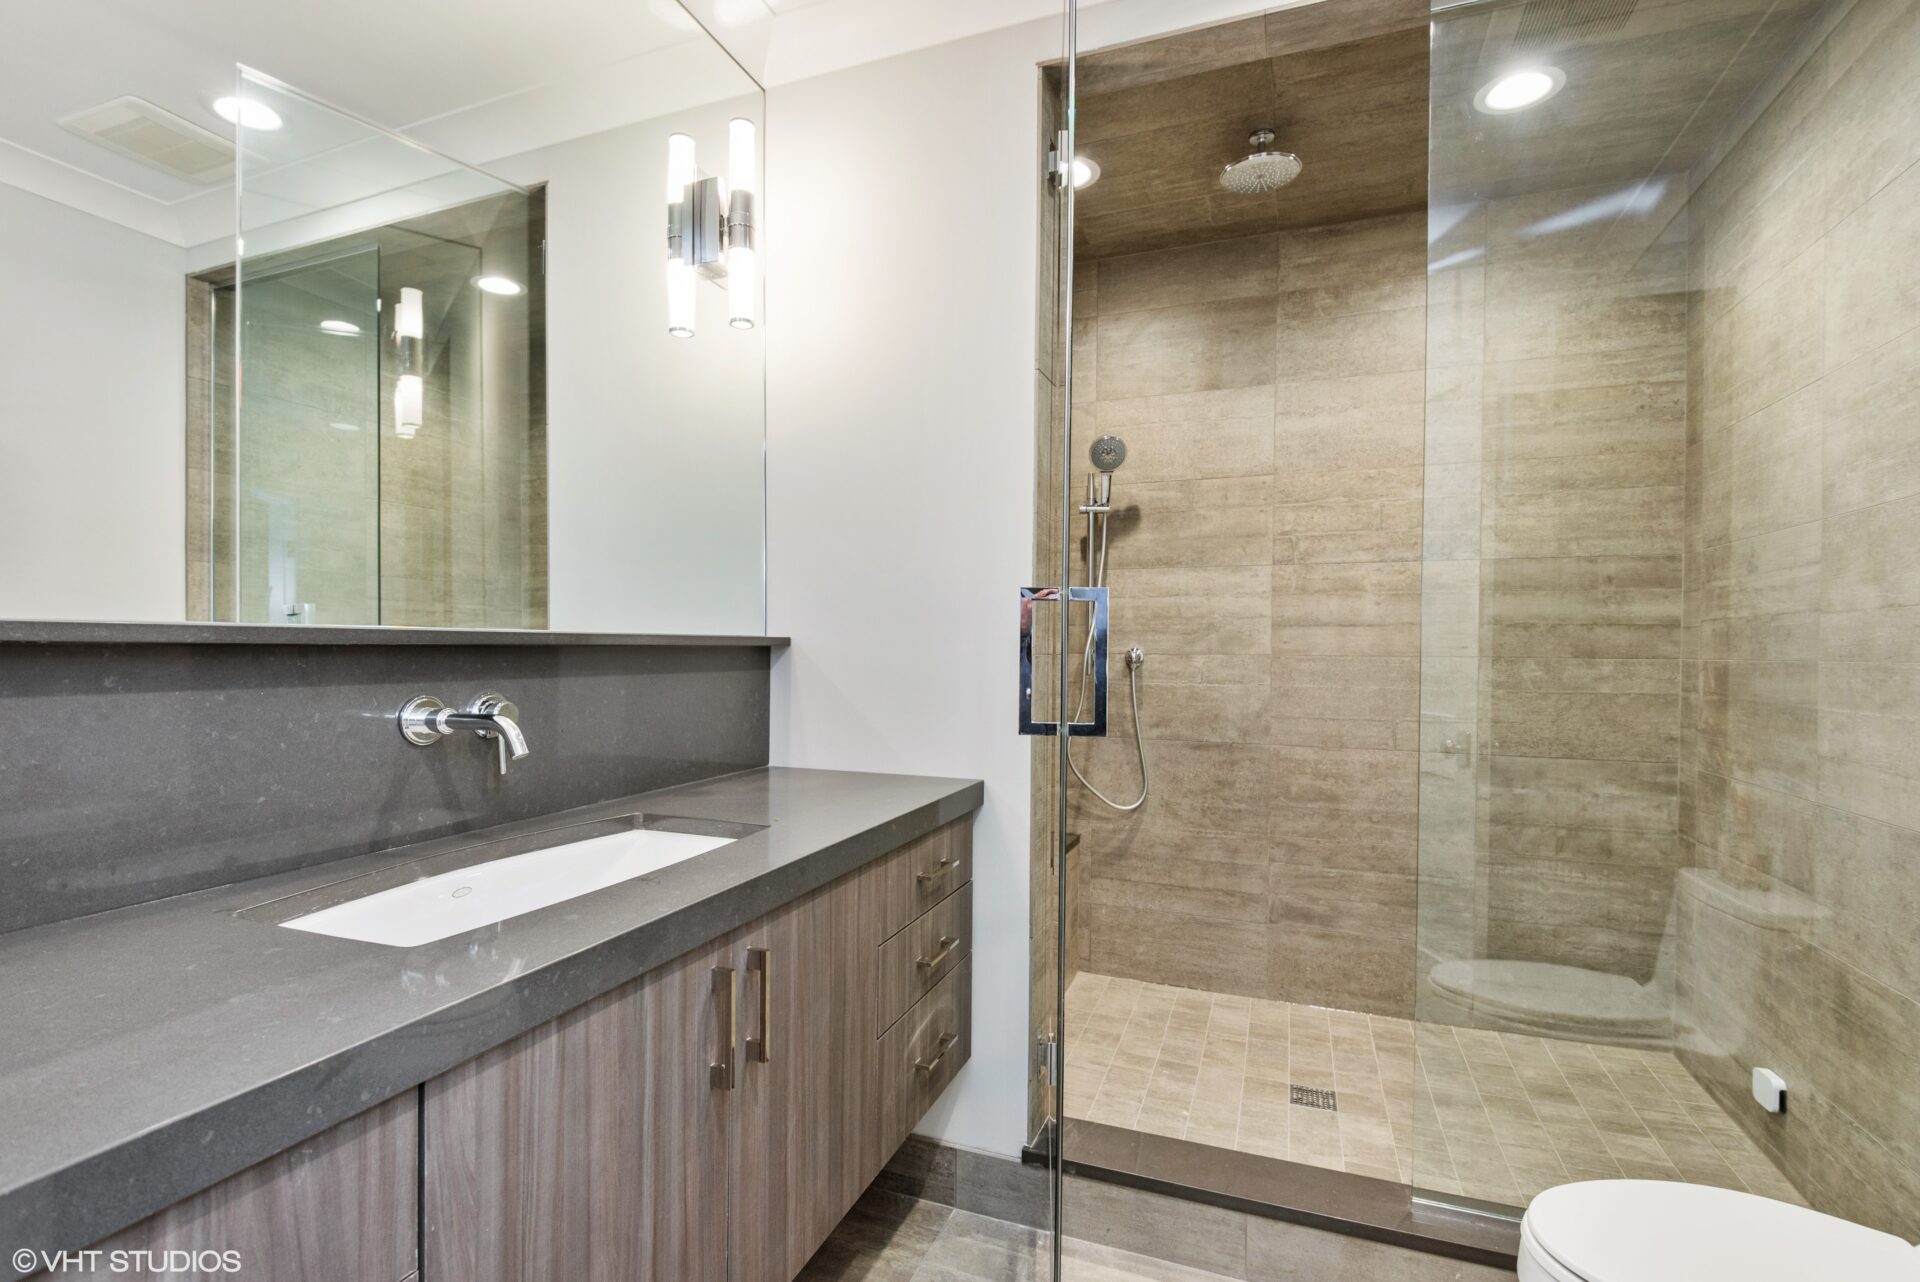 bathroom with sink and shower, ambient lighting